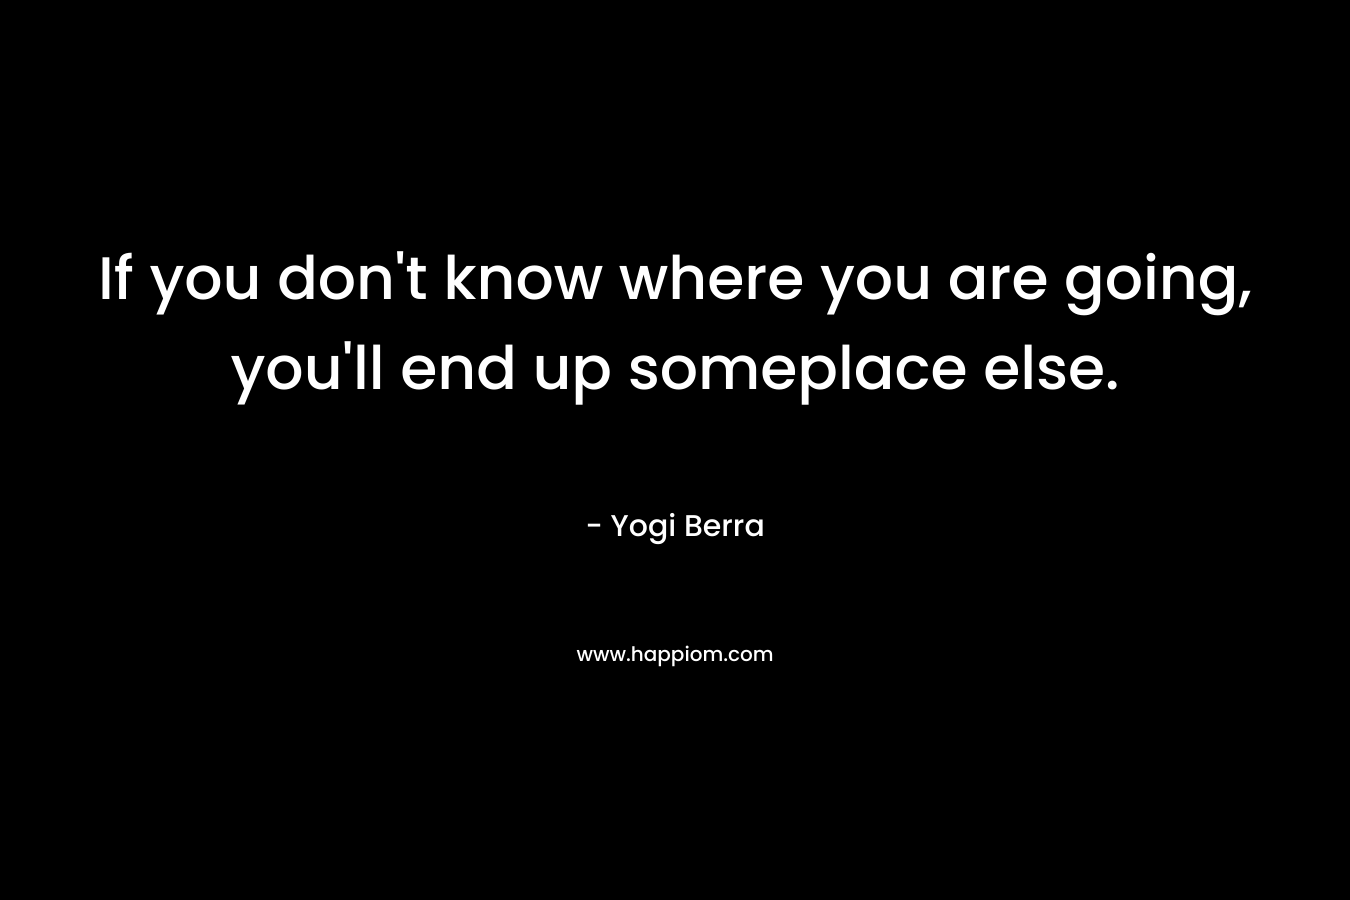 If you don’t know where you are going, you’ll end up someplace else. – Yogi Berra